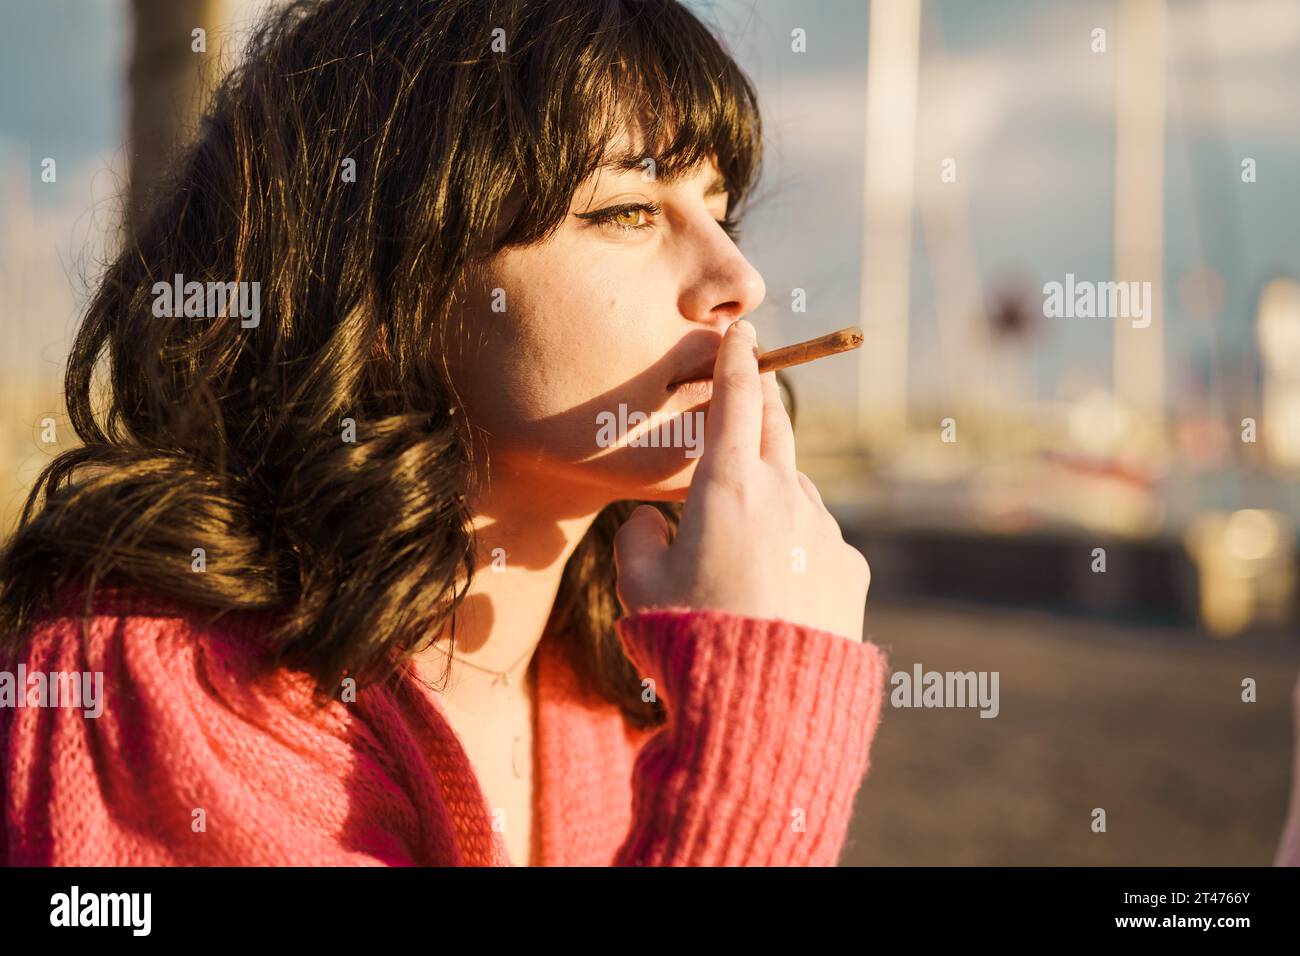 Young woman smoking by the sea - A young woman smokes by the sea, reflecting on youth's vices. The calm setting contrasts with her intense gaze, highl Stock Photo